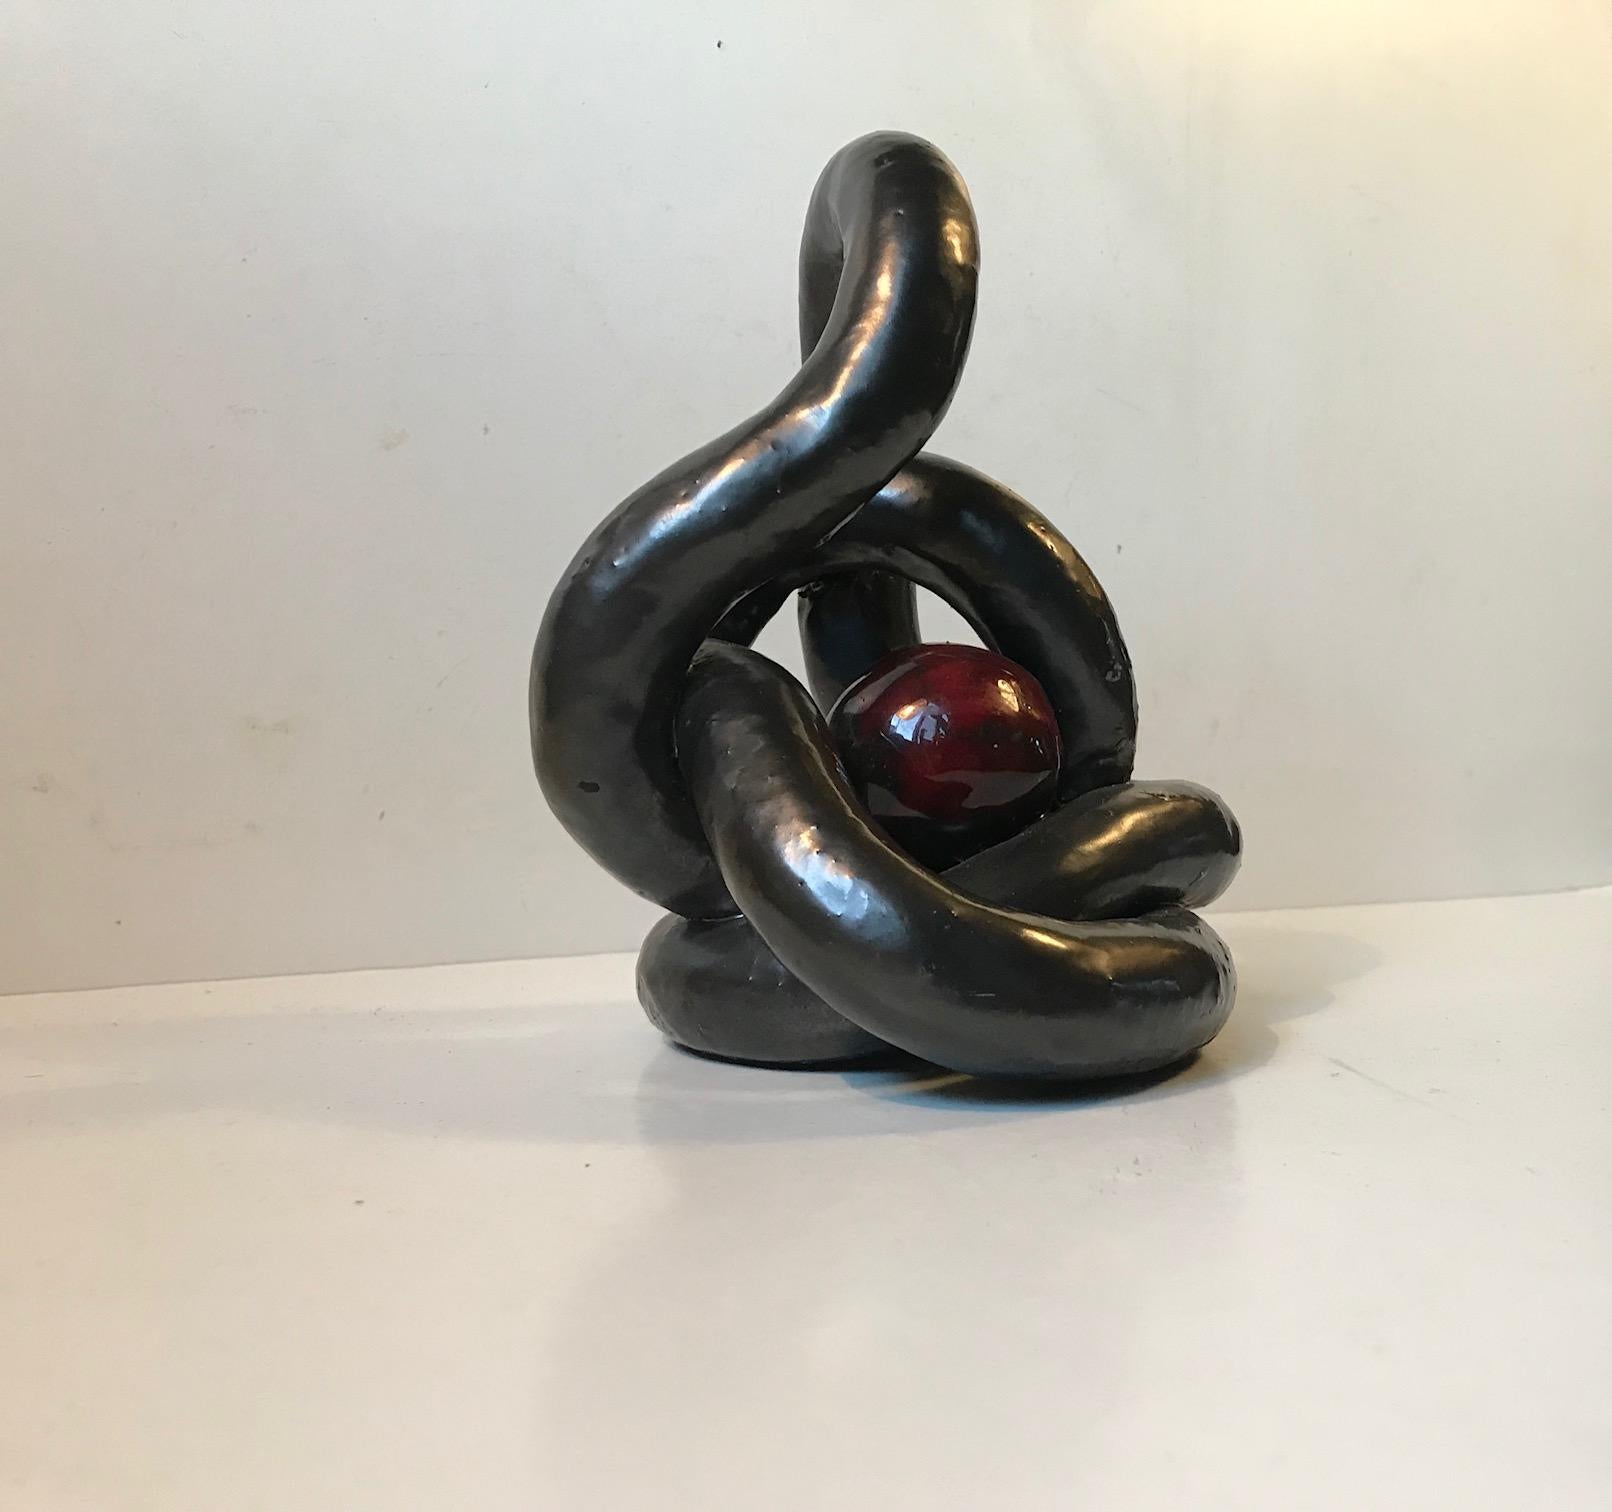 An ornamental play on the Classic eternity symbol. This modernist sculpture by an anonymous Danish ceramist would serve as a fine focal point in any living room setting. It is executed in clay and applied with a black almost lustre-like main glaze.